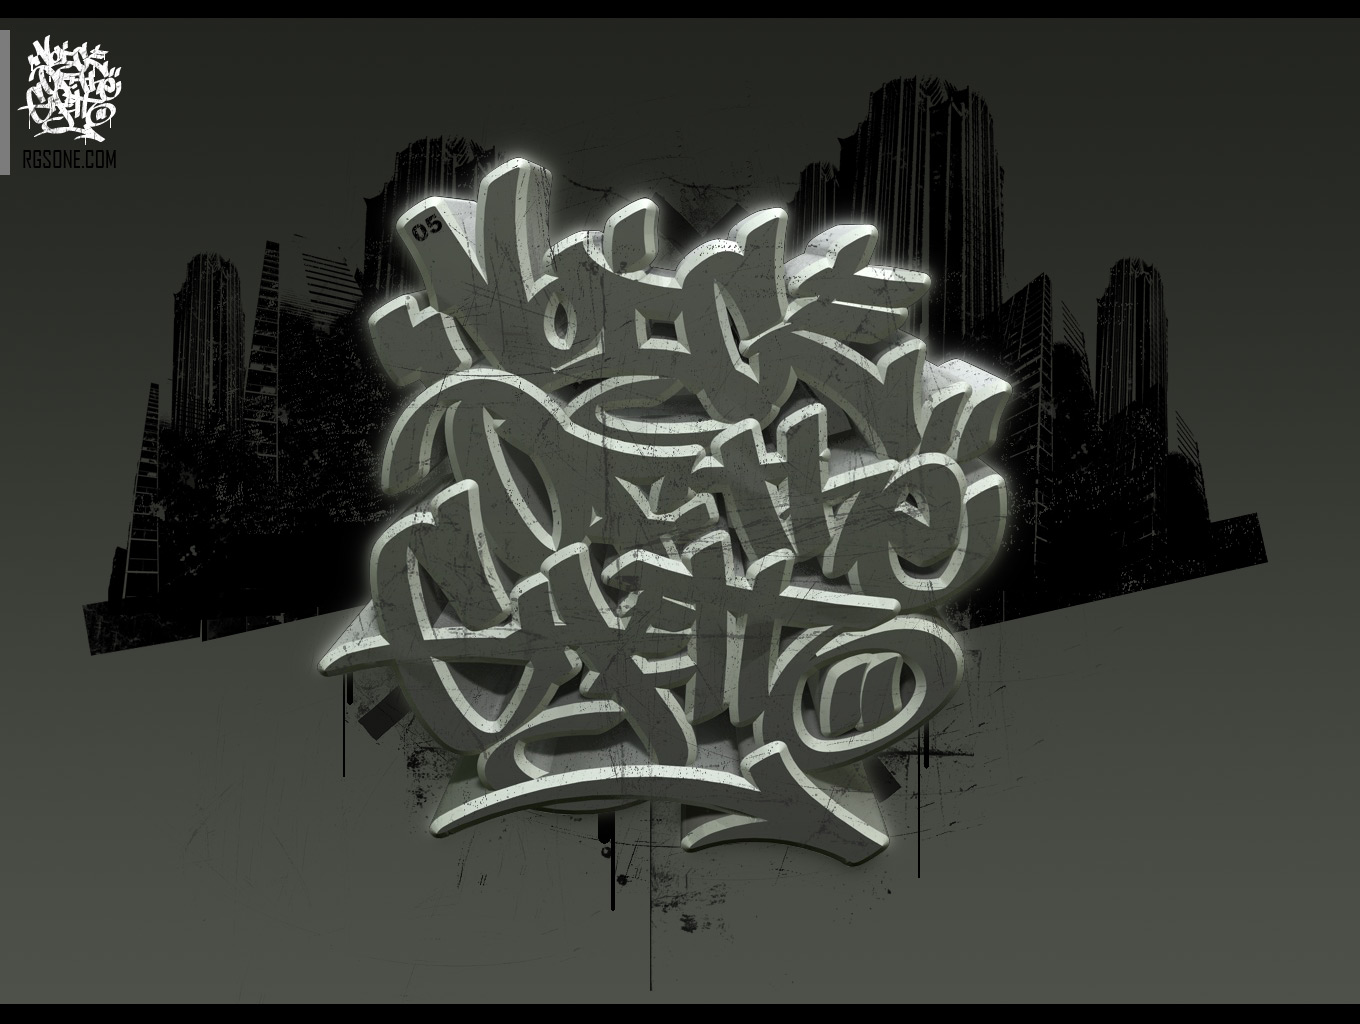 Voice Of The Ghetto Wallpaper By Rgsone